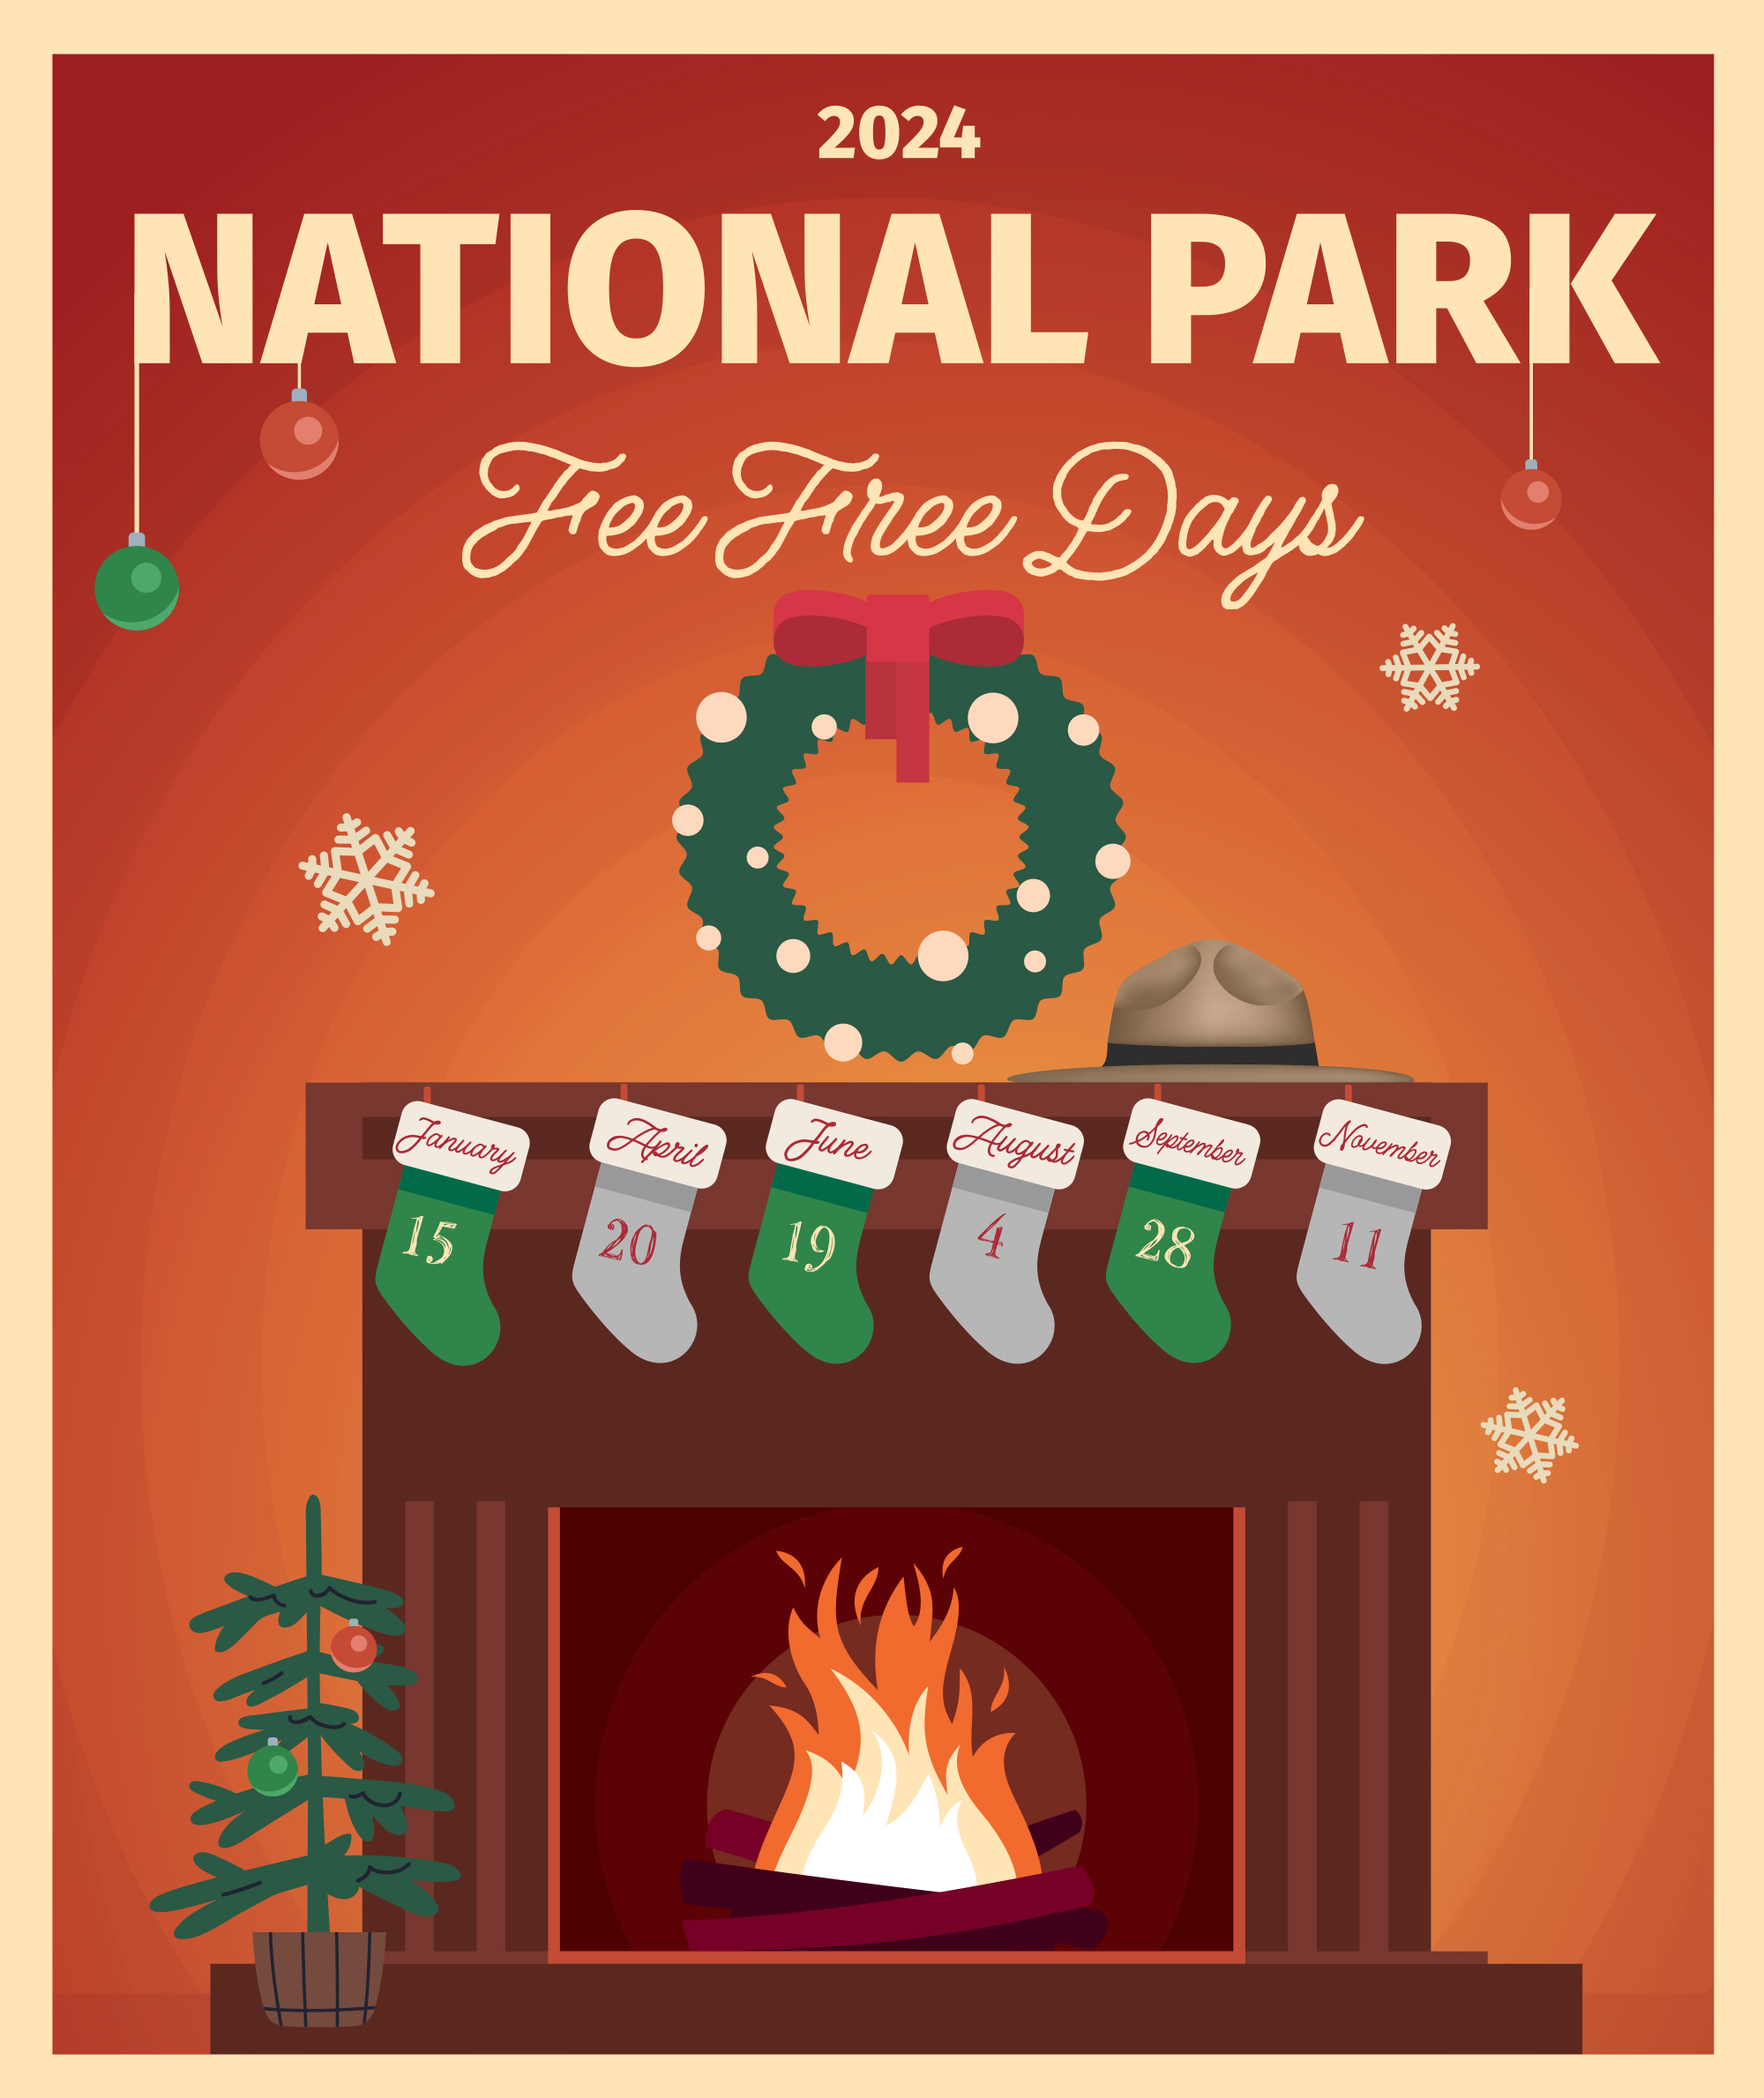 A cartoon drawing of a fire in a fireplace; a ranger hat on the mantle, a wreath above the mantle, a Christmas tree on the left. Text reads "2024 National Park Fee Free Days," and 6 stockings reveal the dates: Jan 15, Apr 20, Jun 19, Aug 4, Sep 28, Nov 11